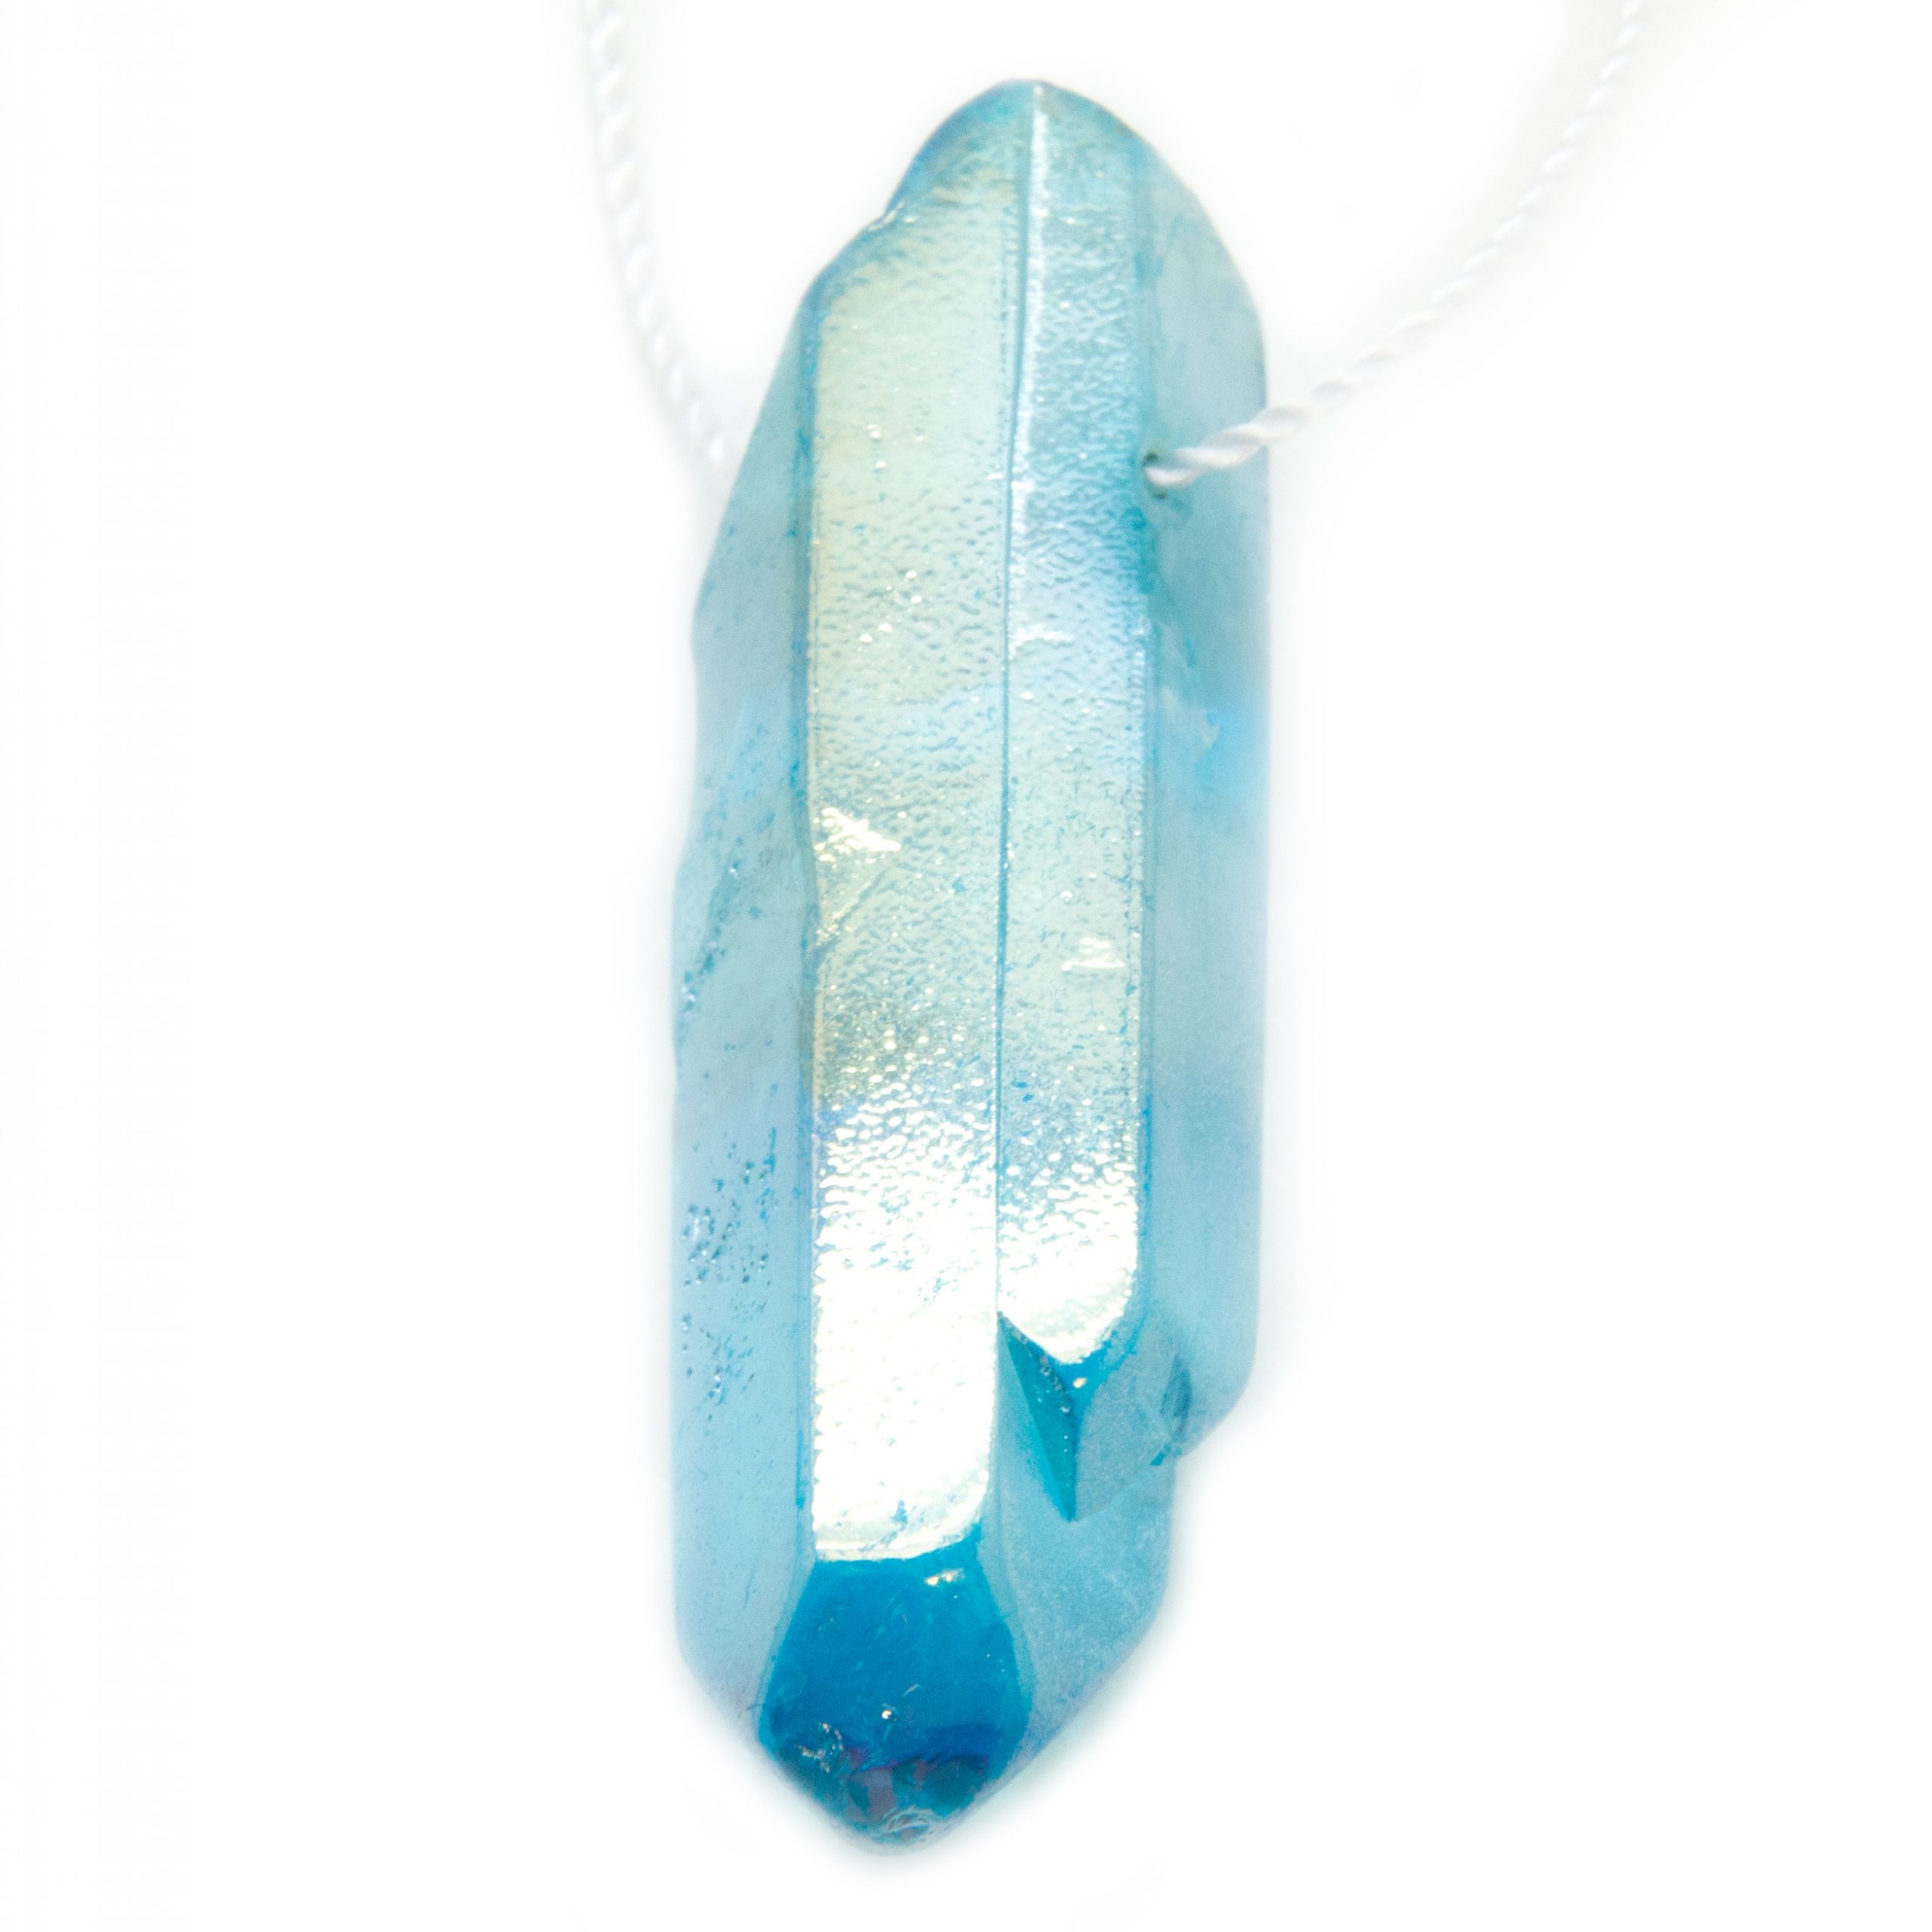 WT-N495 Wholesale Aqua Aura Crystal Pendant With Gold Capped Top Chain Quartz  Necklace Natural Jewelry Beaded Finding - AliExpress